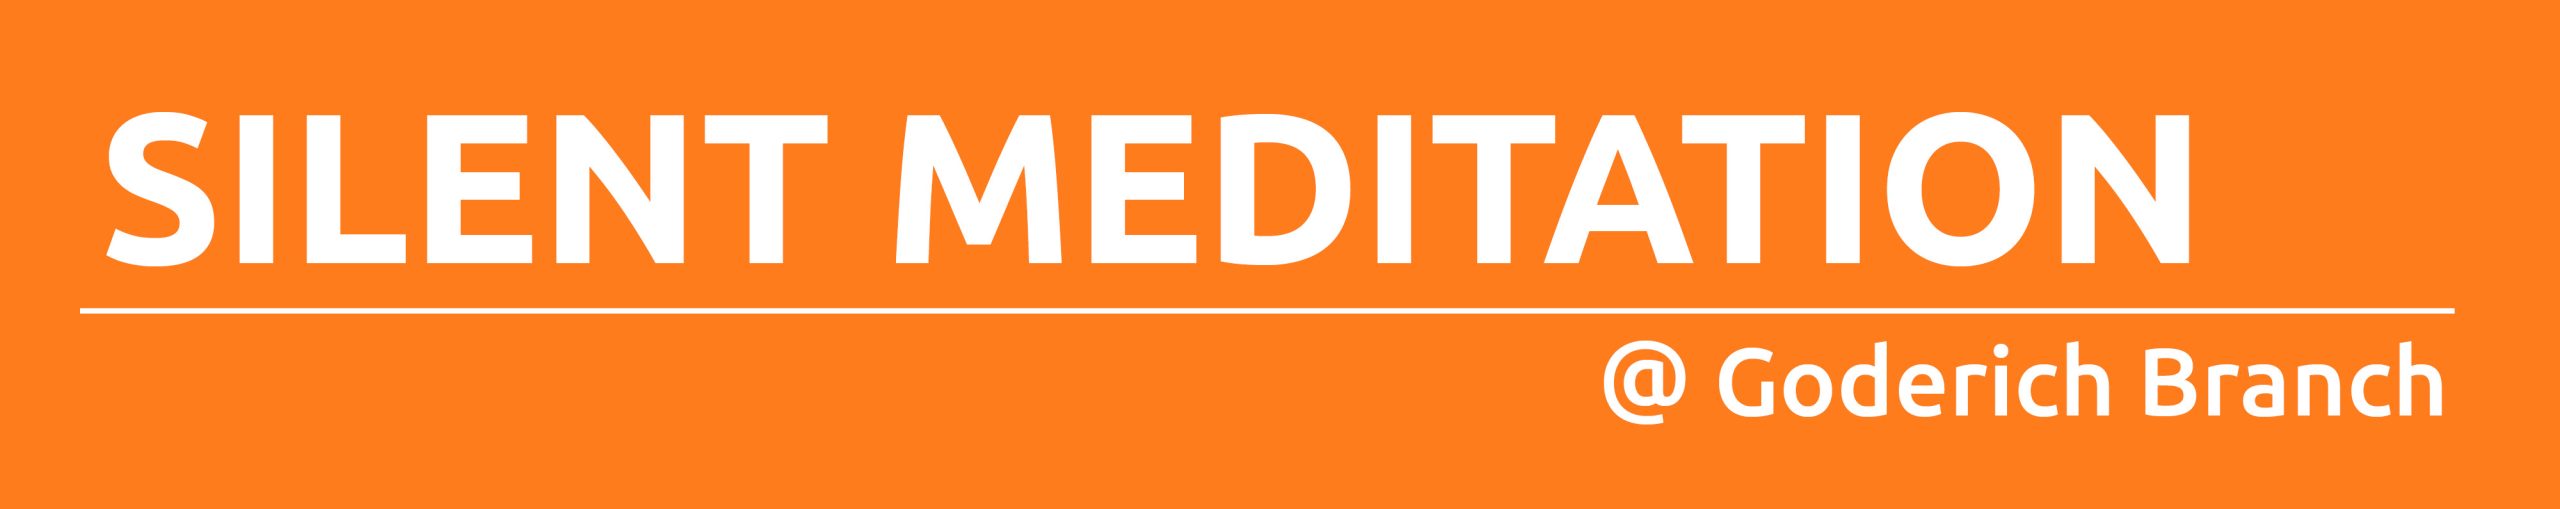 White text on orange background promoting Silent Meditation at Goderich Branch